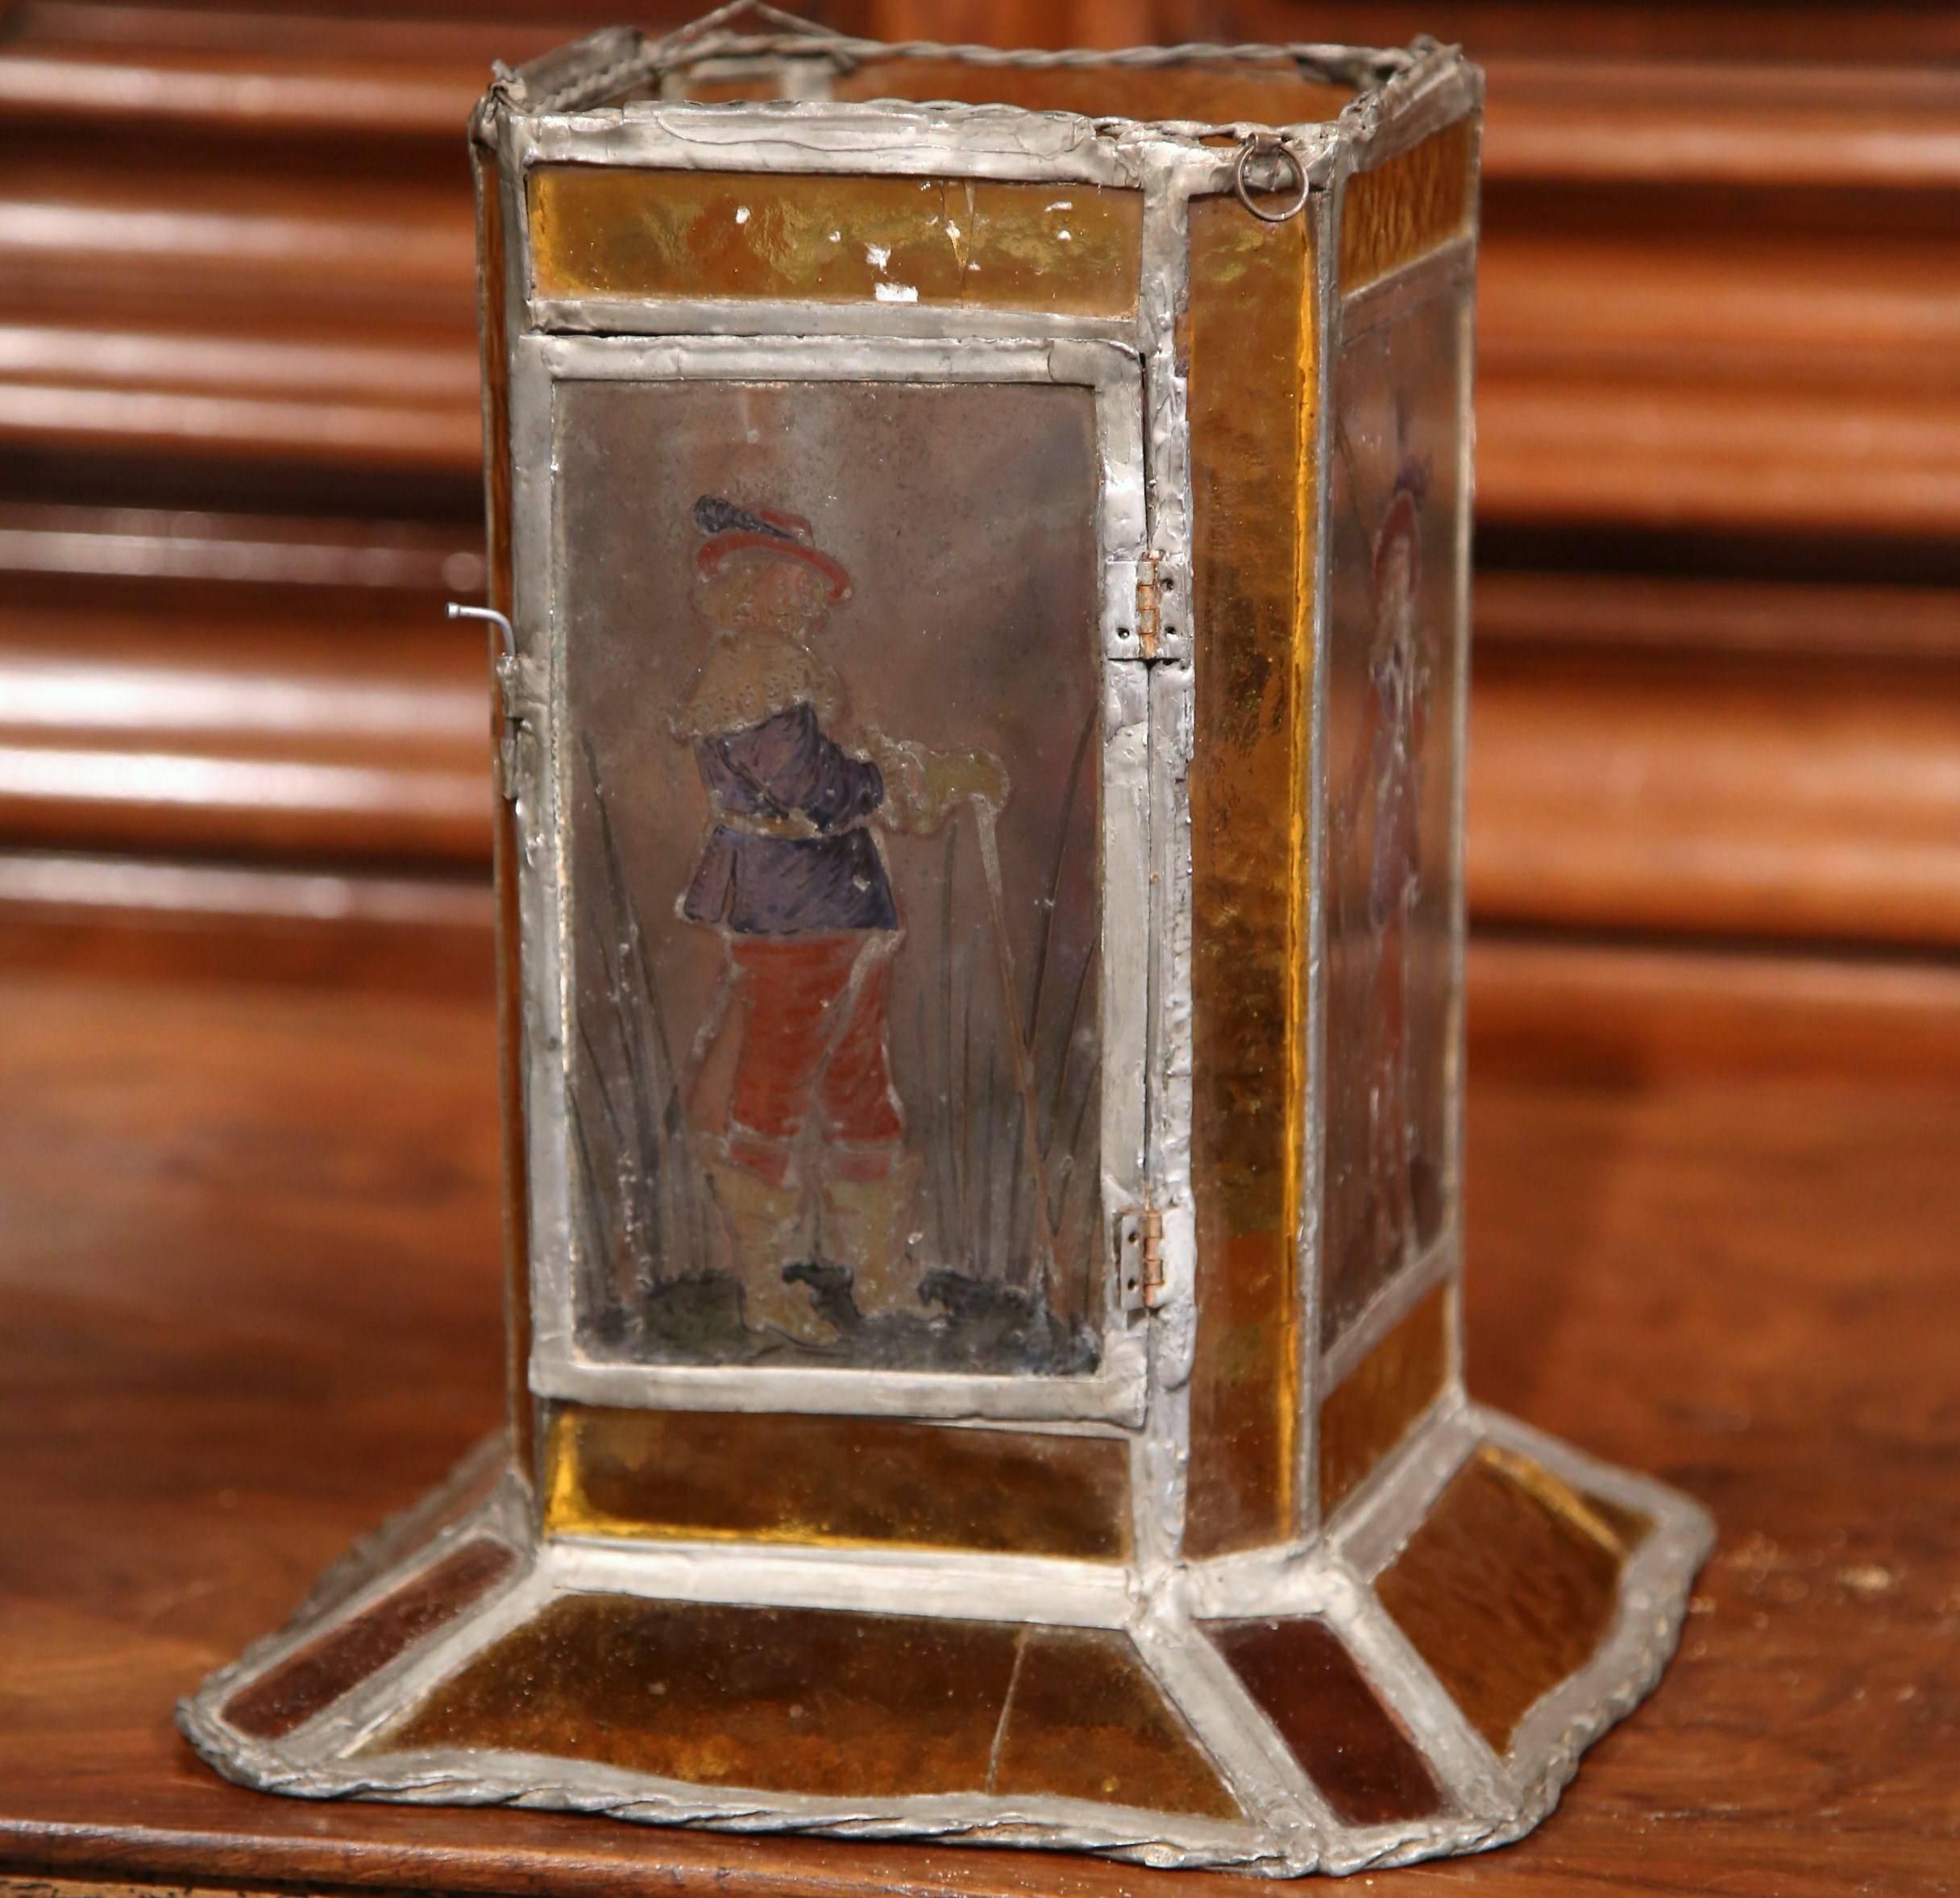 This interesting stain glass table lantern was created in Southern France, circa 1820. The small, unique lantern features four musketeers in courtly attire. The fixture has a small door on one side so you can place a candle inside. The light is in